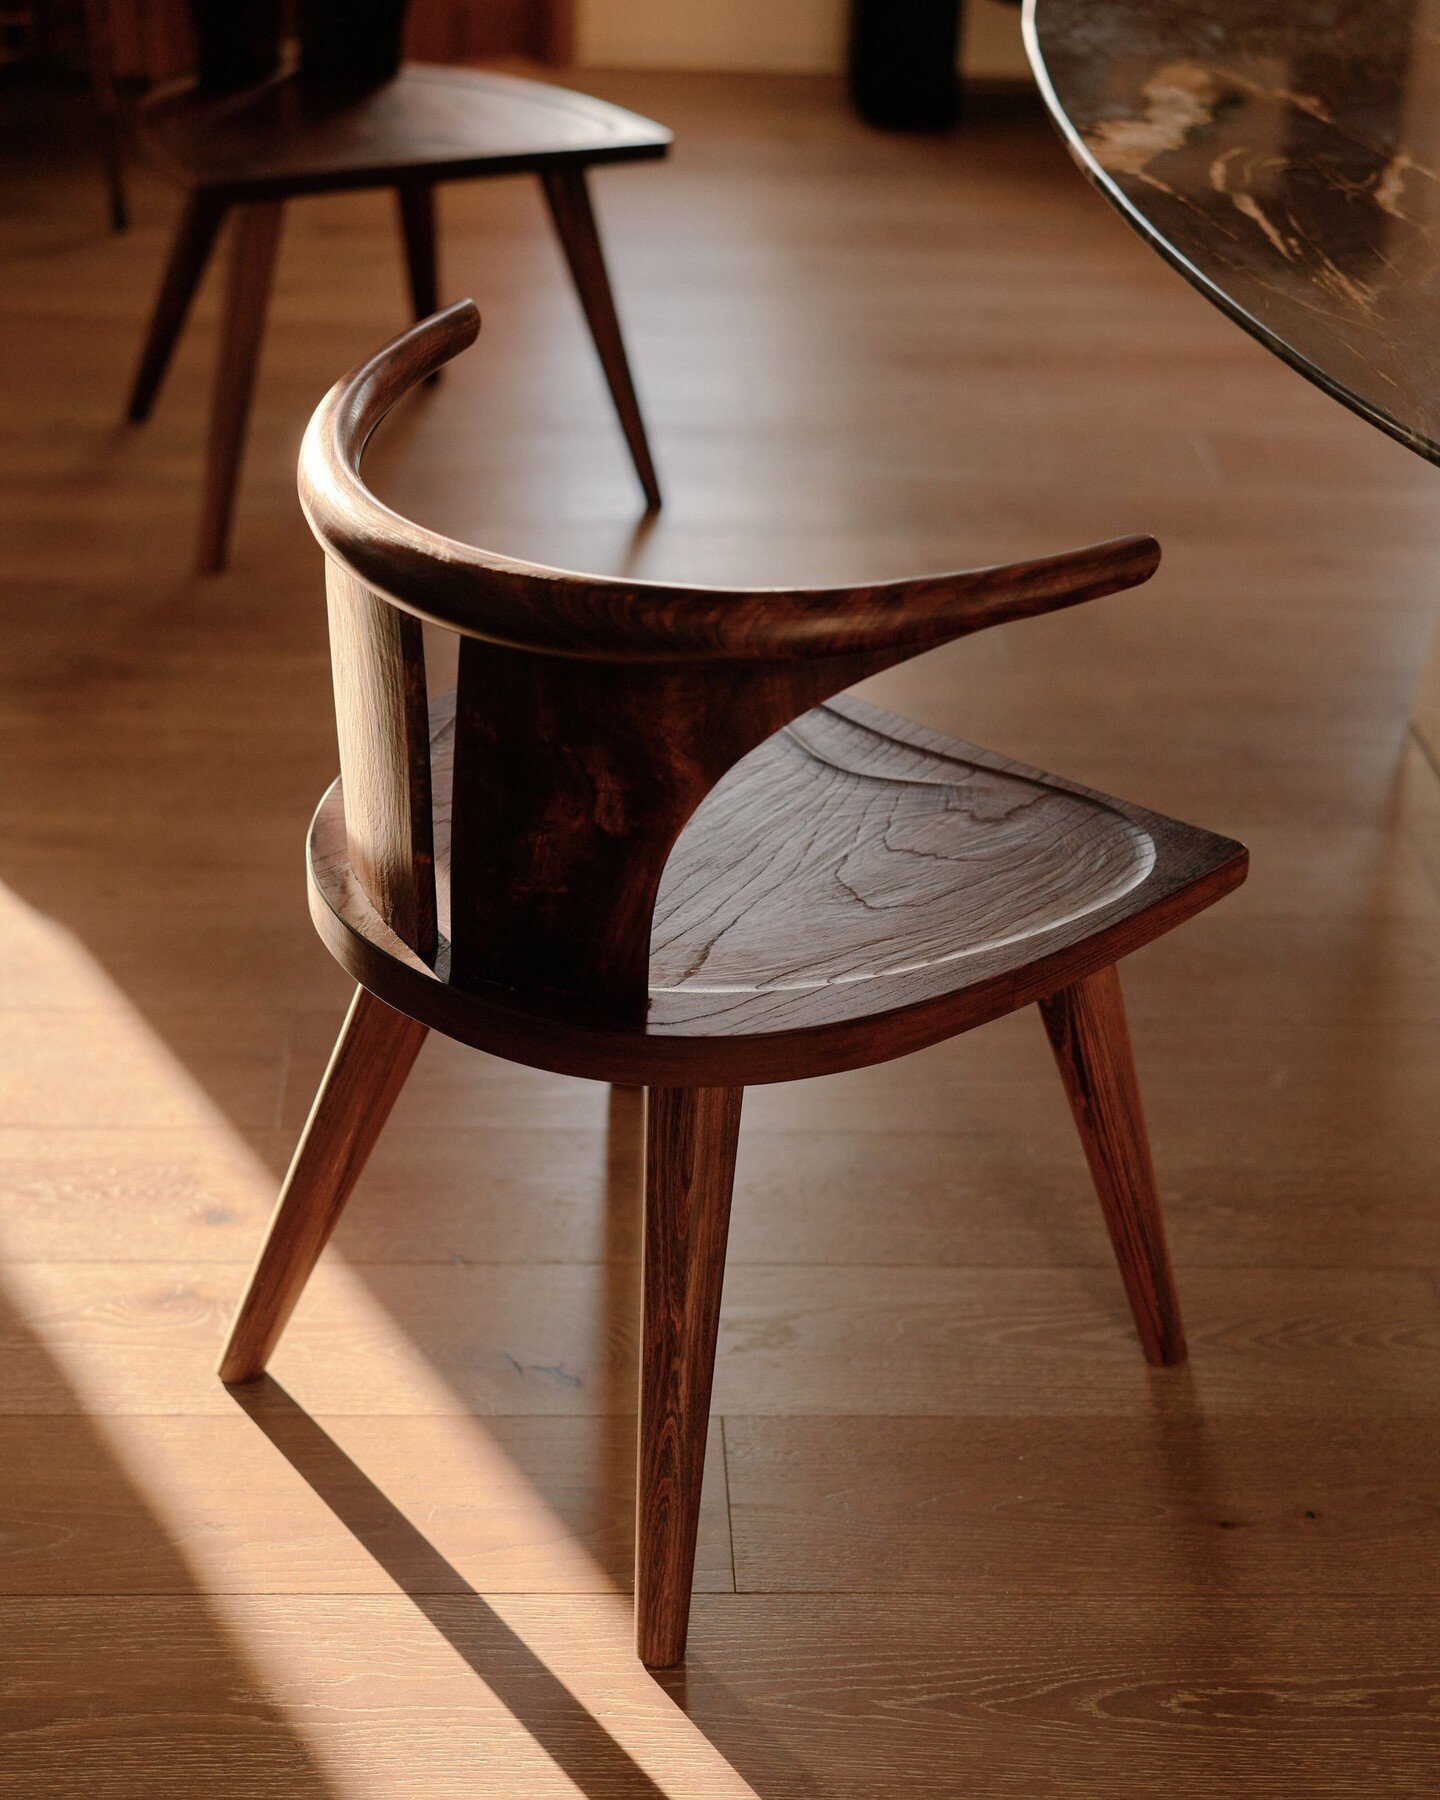 KOZA DINING CHAIR - The Koza Dining Chair, by Master Toshio Tokunaga, was inspired by the Koza Meditation chair, and is created exclusively for Radnor.  This open edition of unique pieces are created from 200+ year old Japanese Zelkova from the Rokko